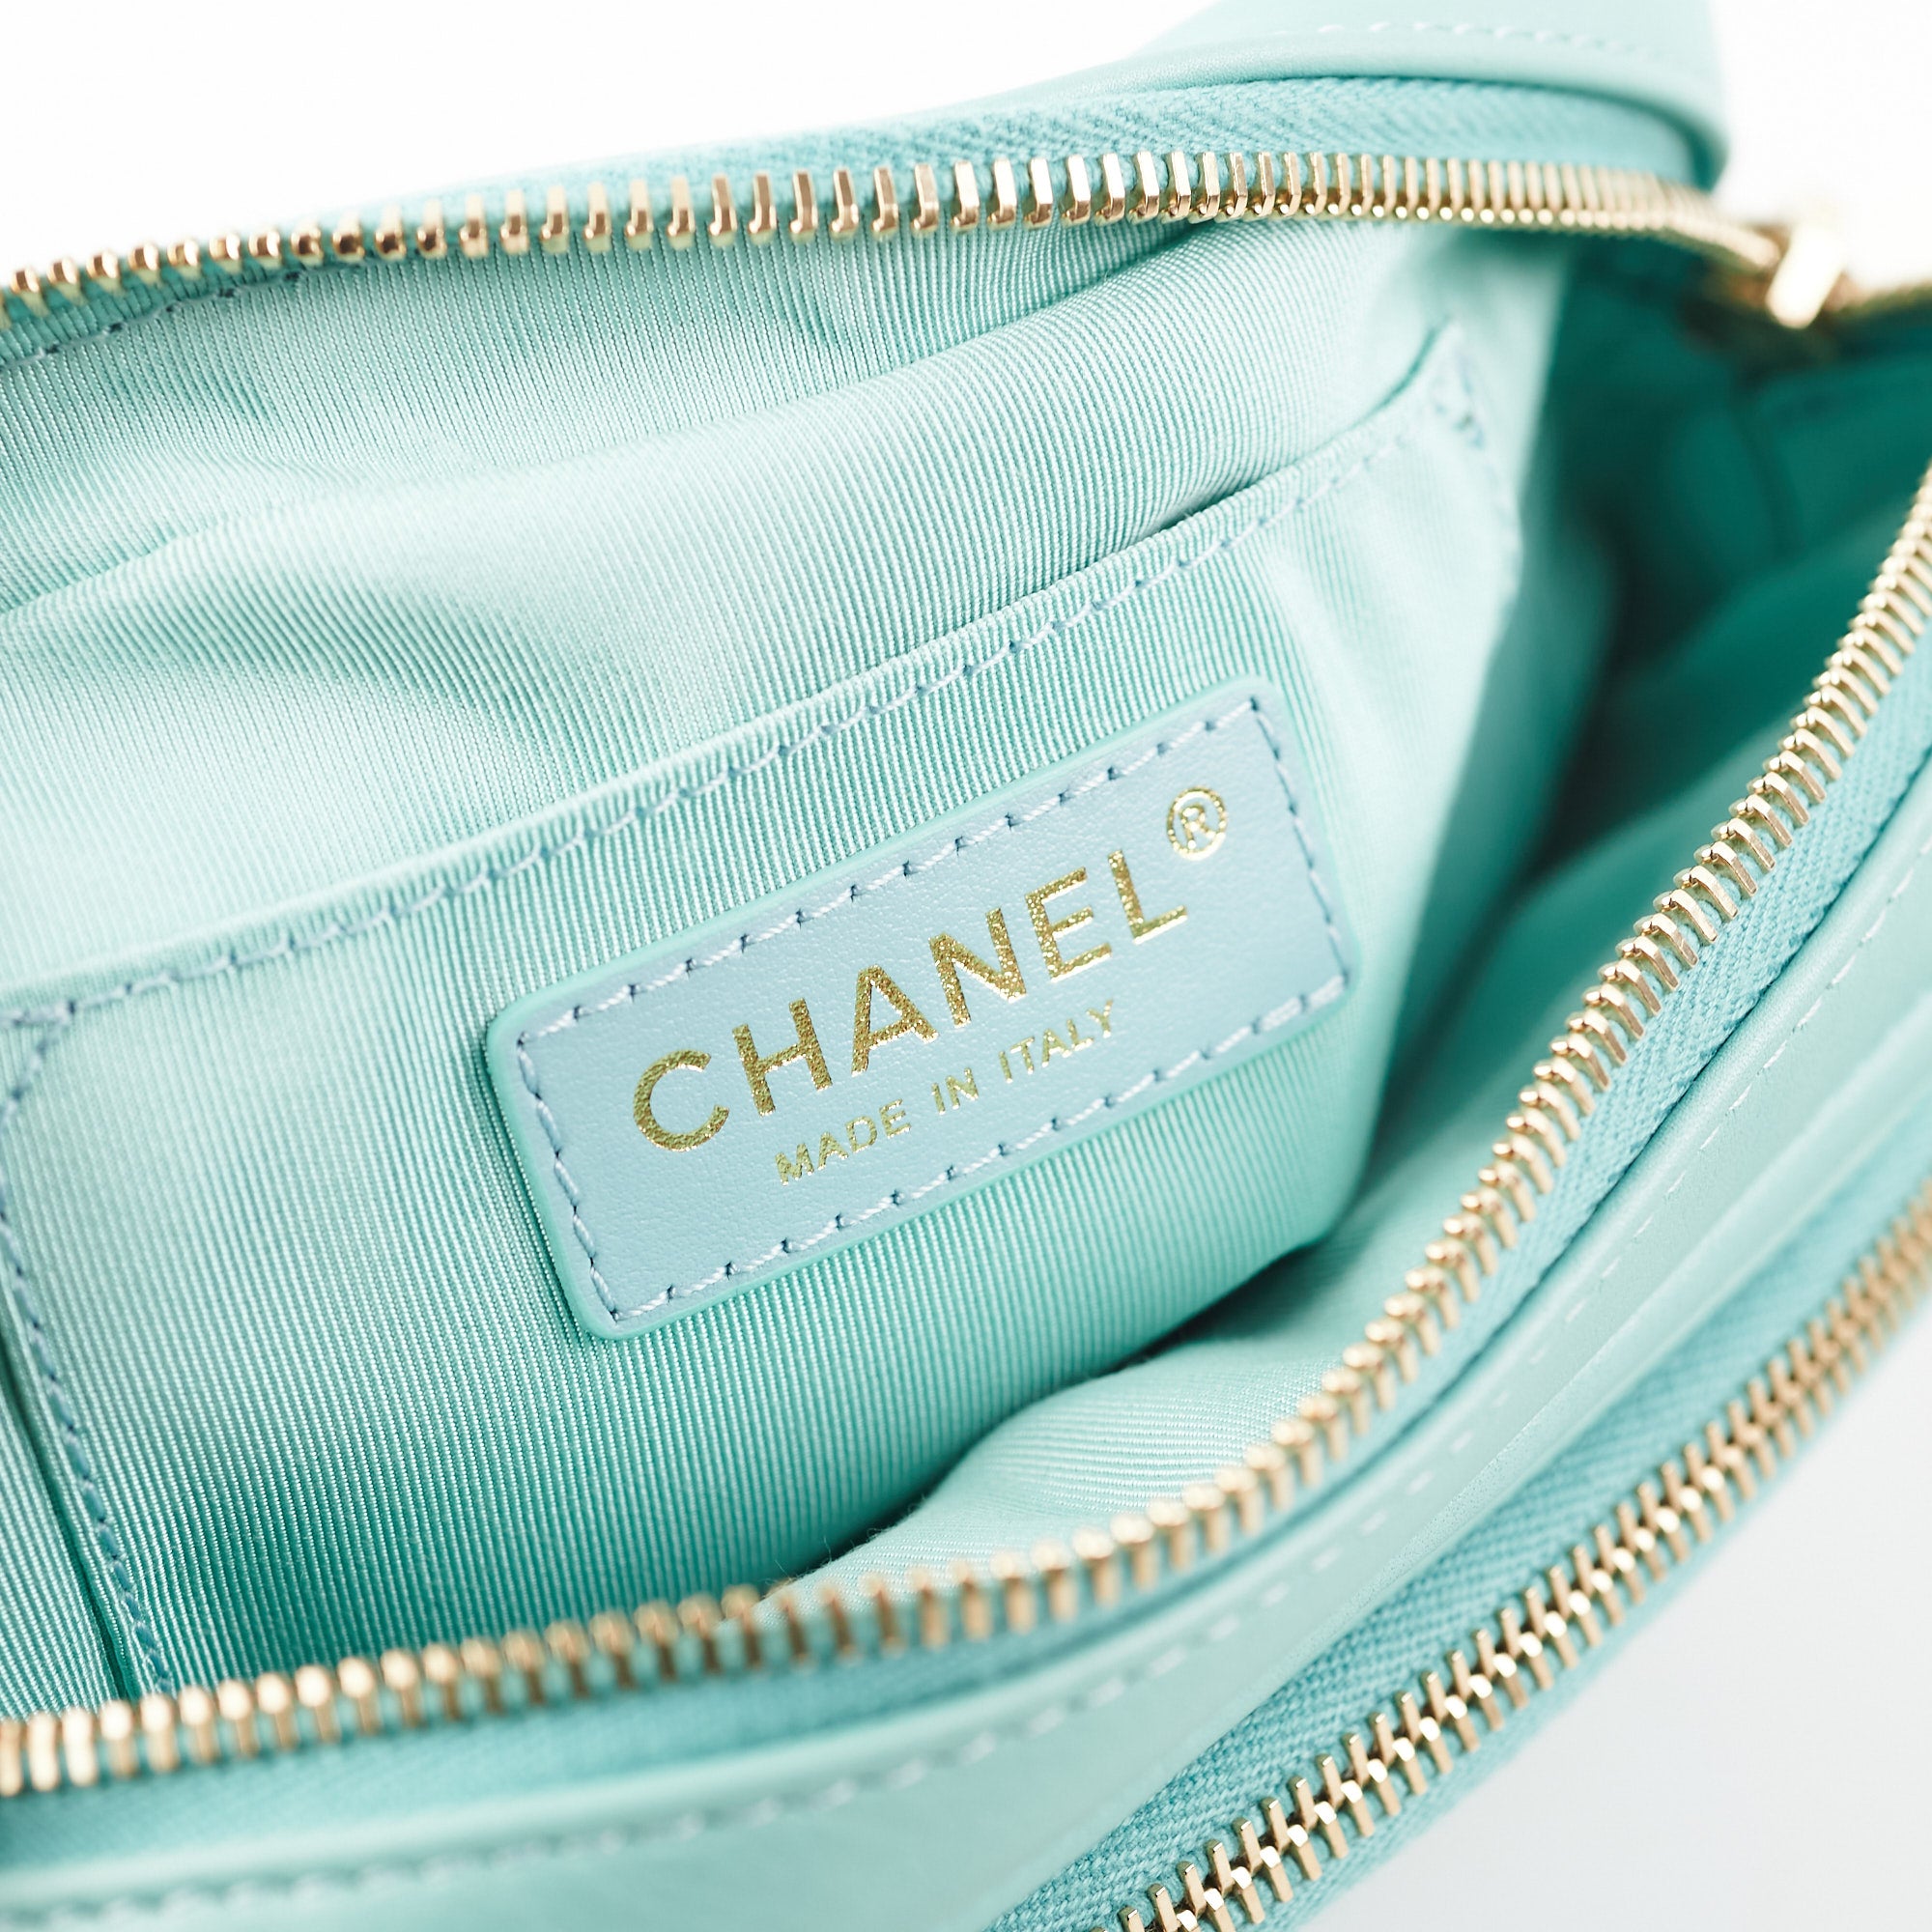 CHANEL, Bags, Chanel Ss9 Collectors Teal Terry Cloth